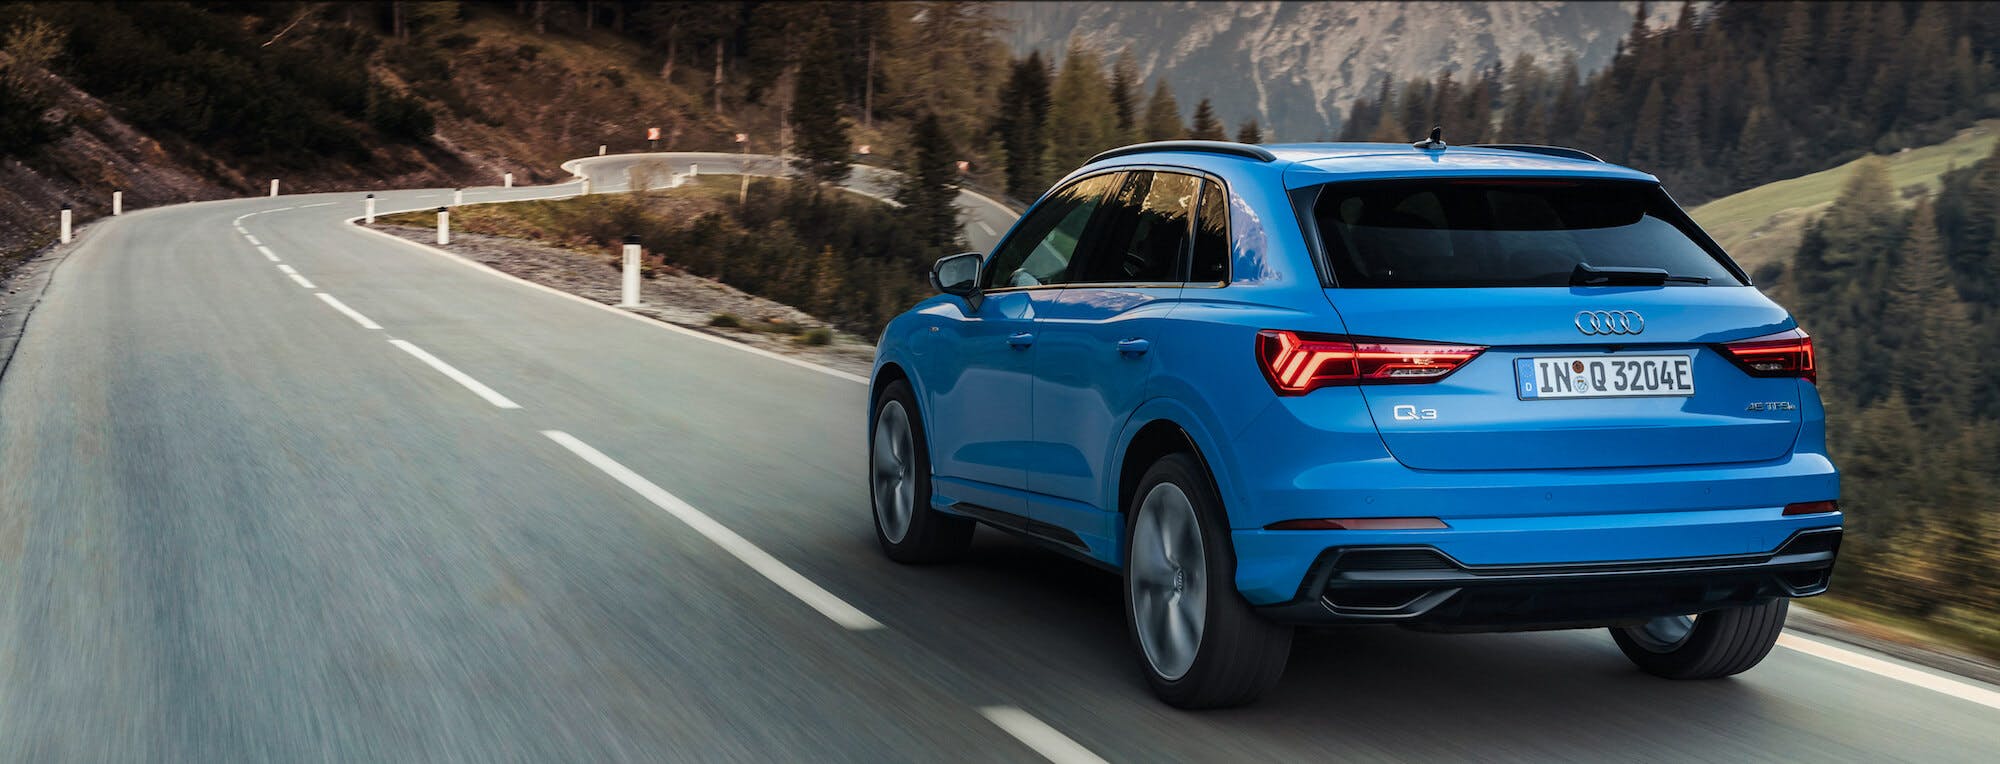 | | Virtuo rental | Audi Long term short Q3 and Virtuo